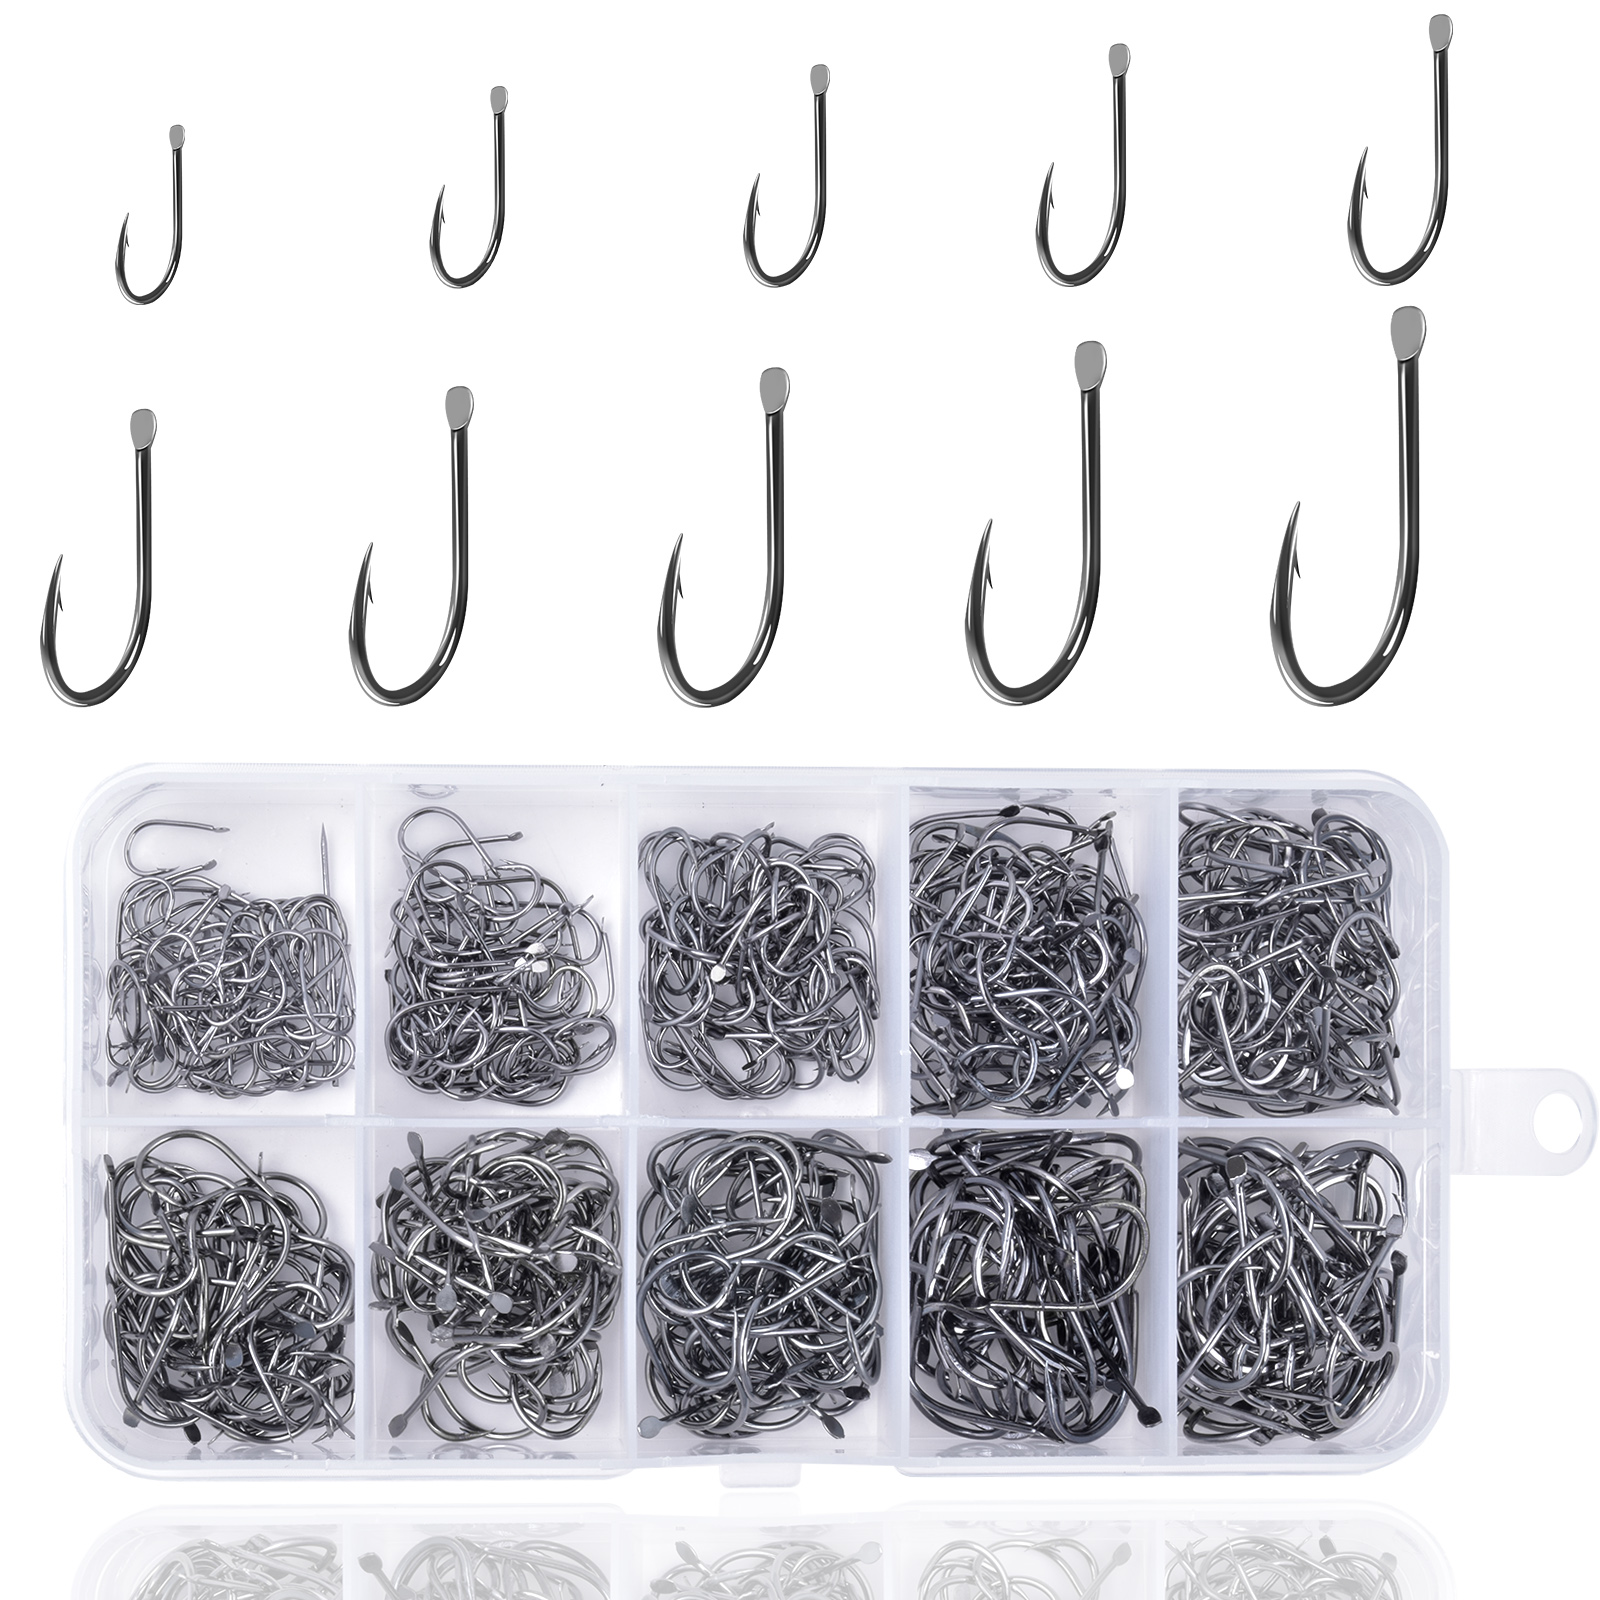 500PCS Premium Fishhooks, 10 Sizes Reemoo Carbon Steel Fishing Hooks W/  Portable Plastic Box, Strong Sharp Fish Hook With Barbs For  Freshwater/Seawate